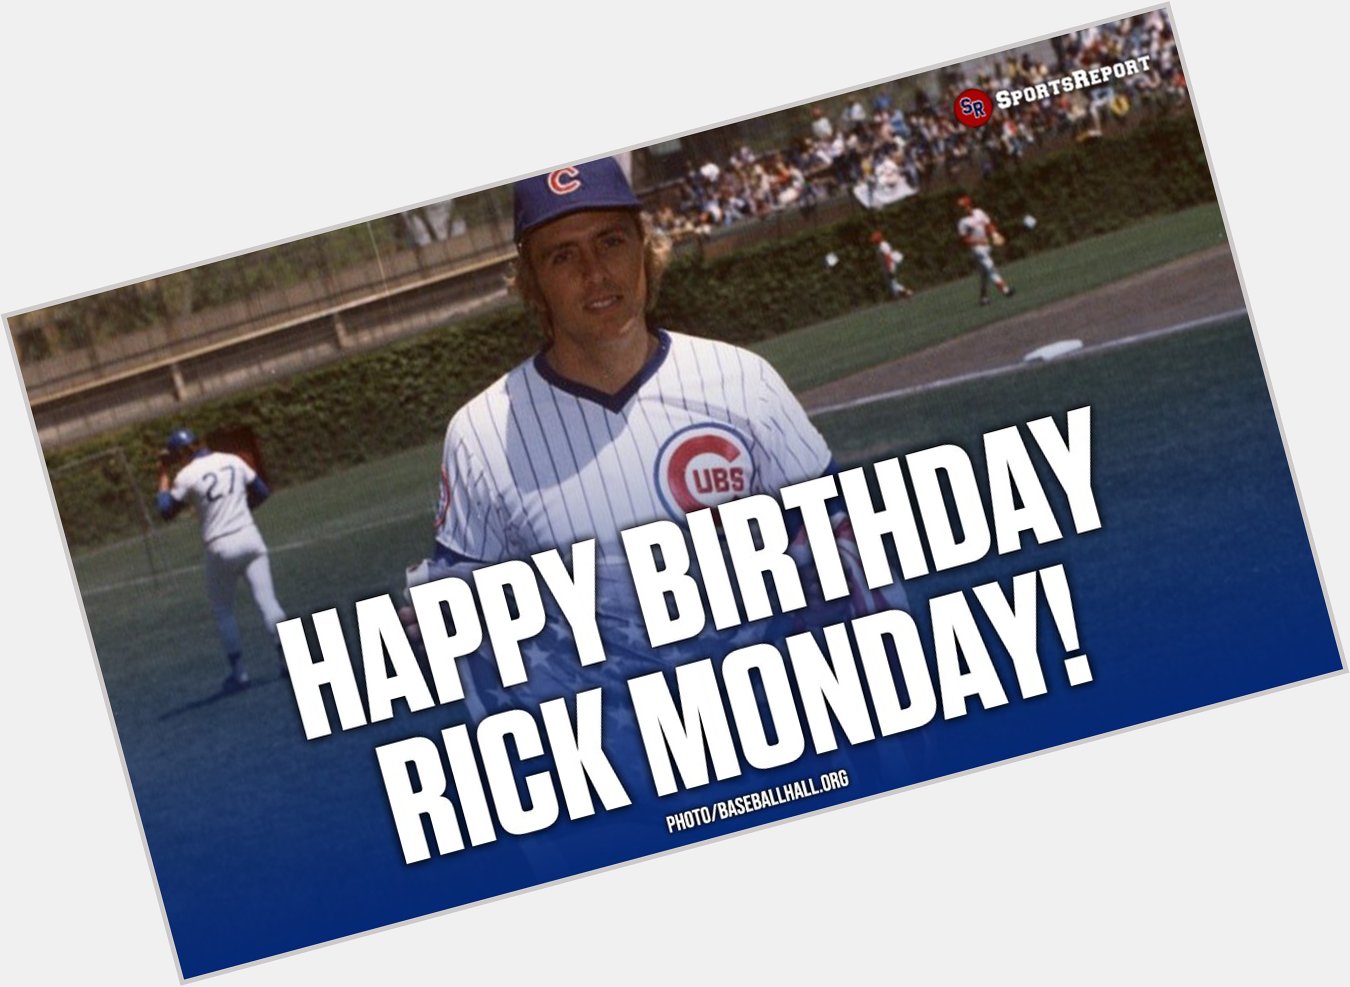  Fans, let\s wish Rick Monday a Happy Birthday! GO CUBS!! 